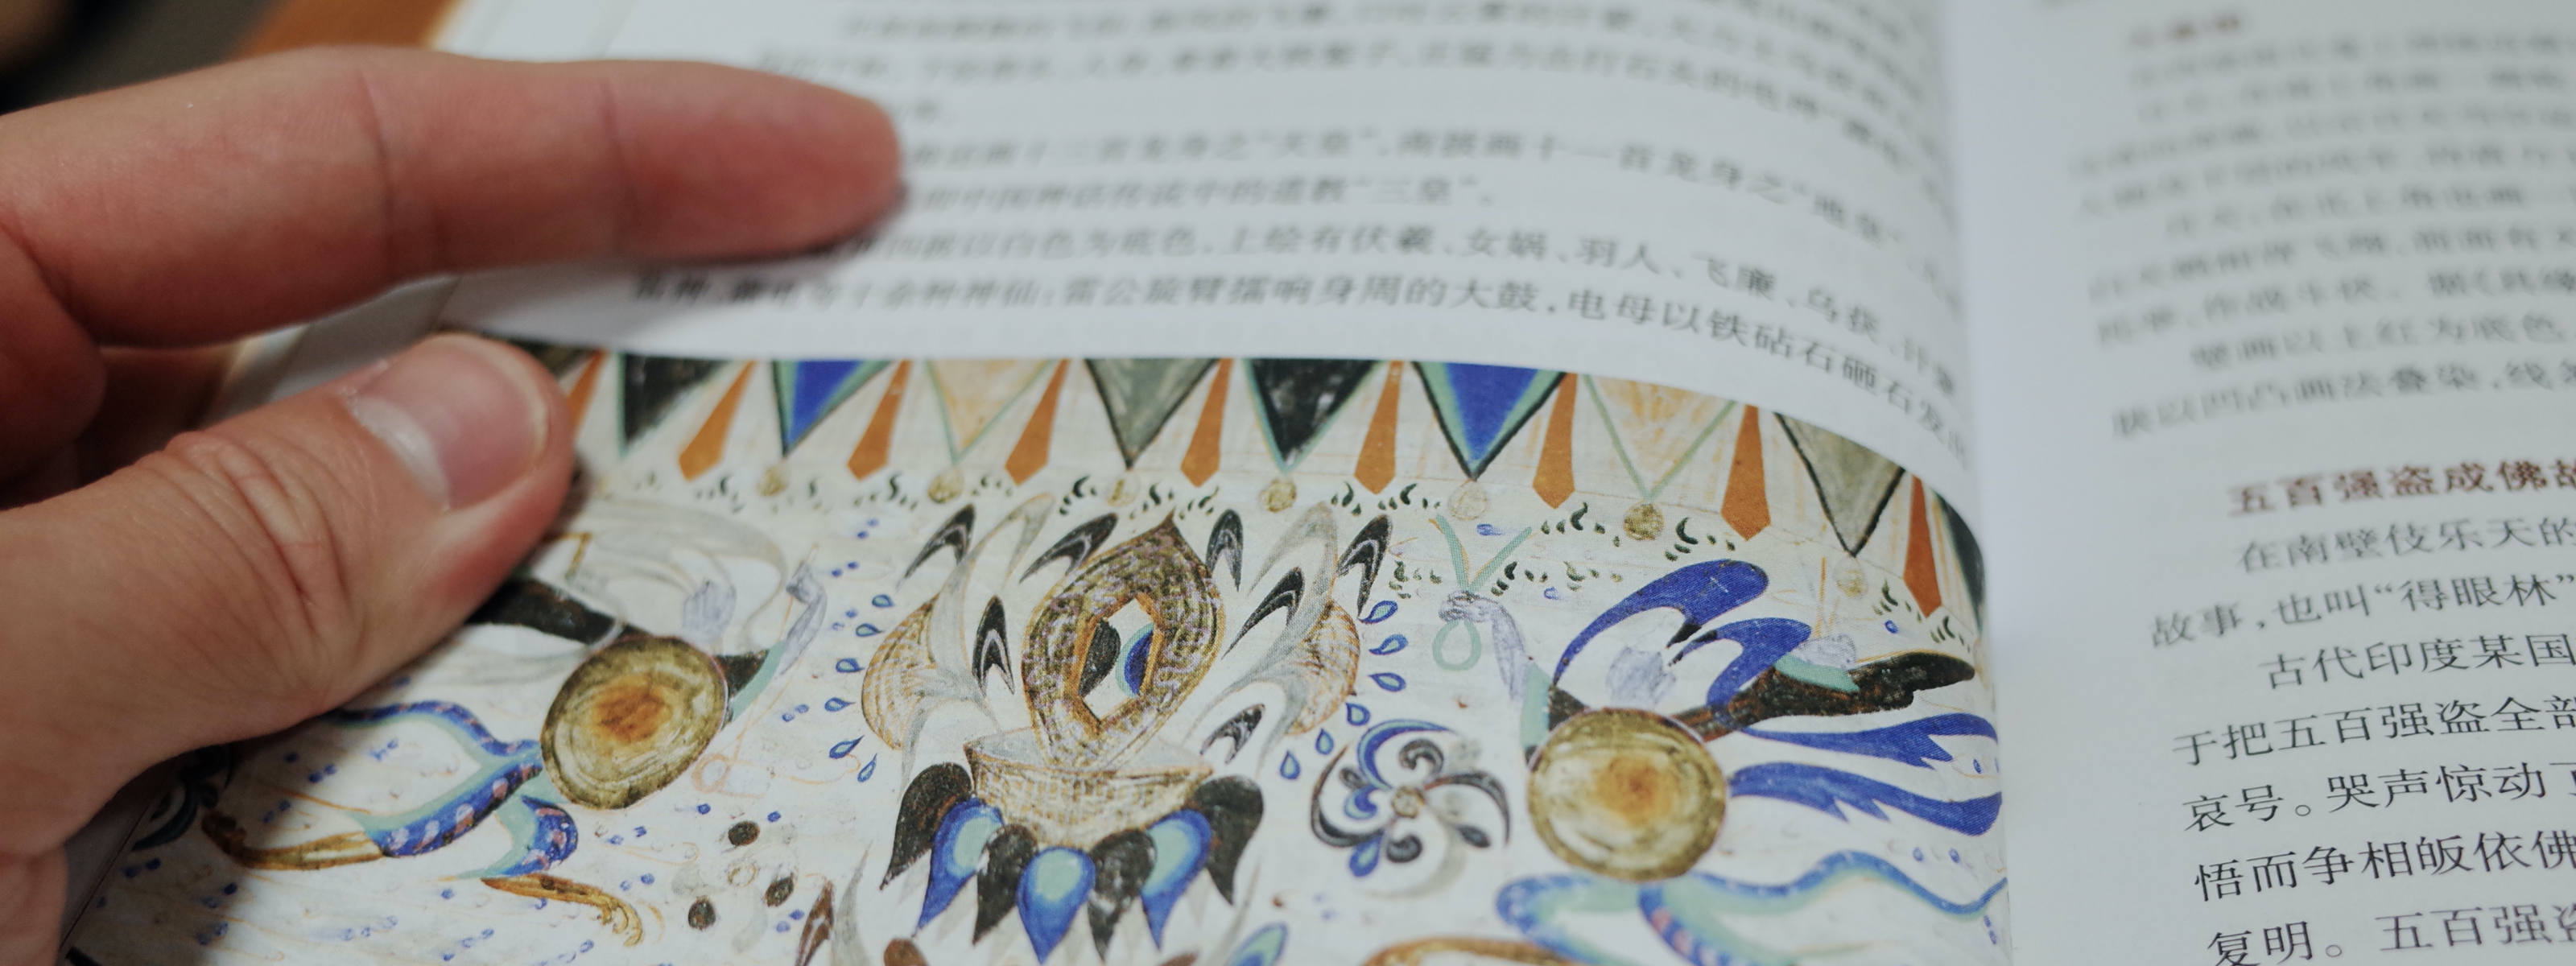 design-story-of- dunhuang-trip - p8